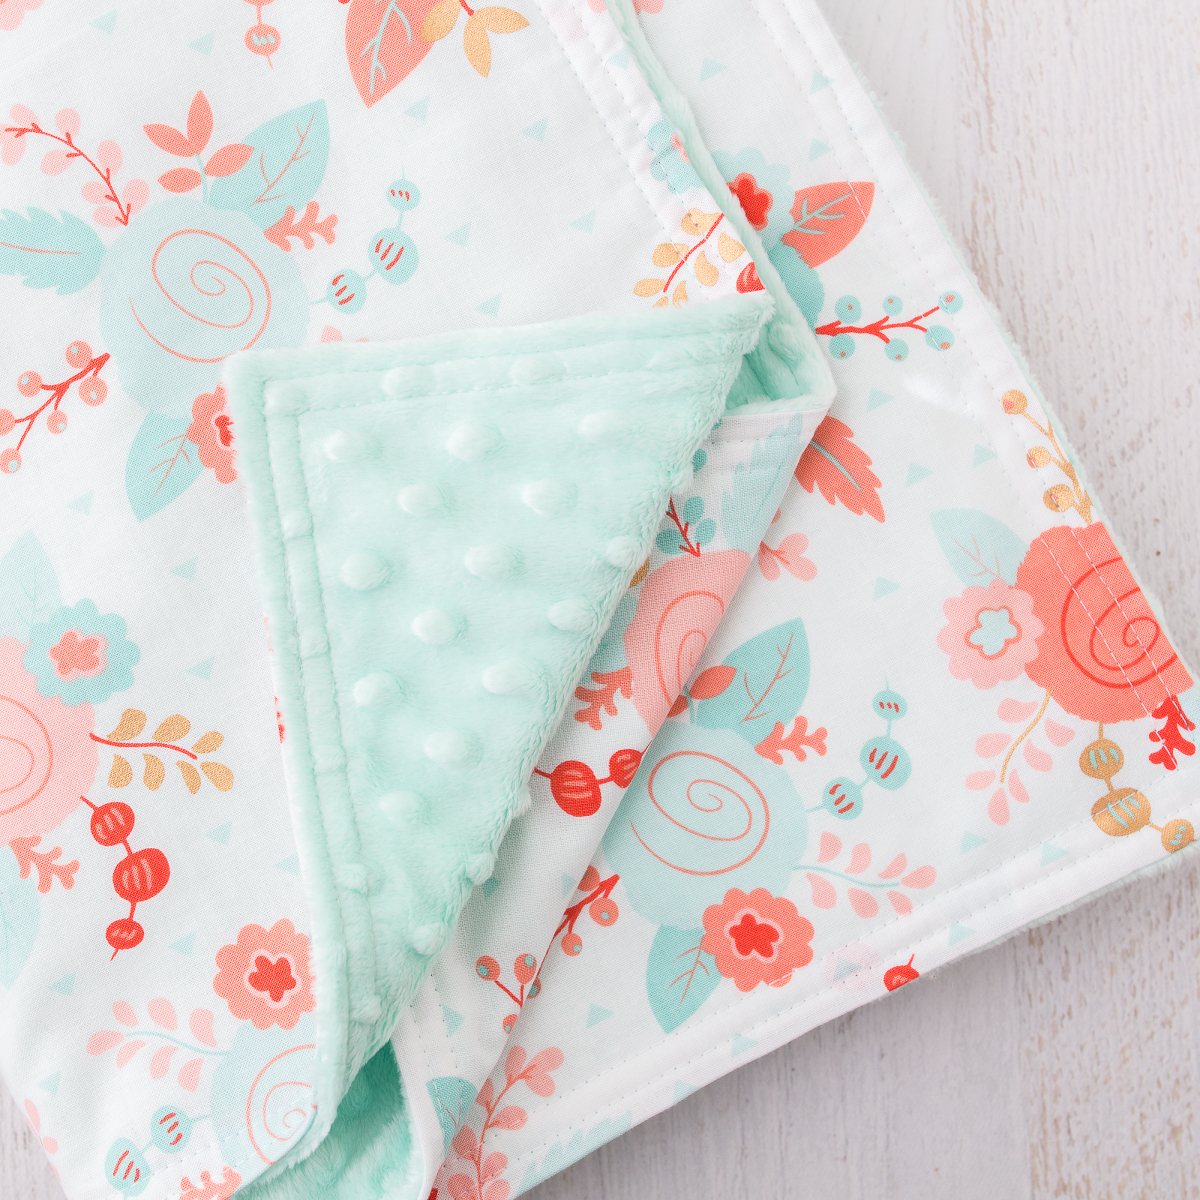 How To Make A Minky Baby Blanket In 30 Minutes! Suzy Quilts | atelier ...